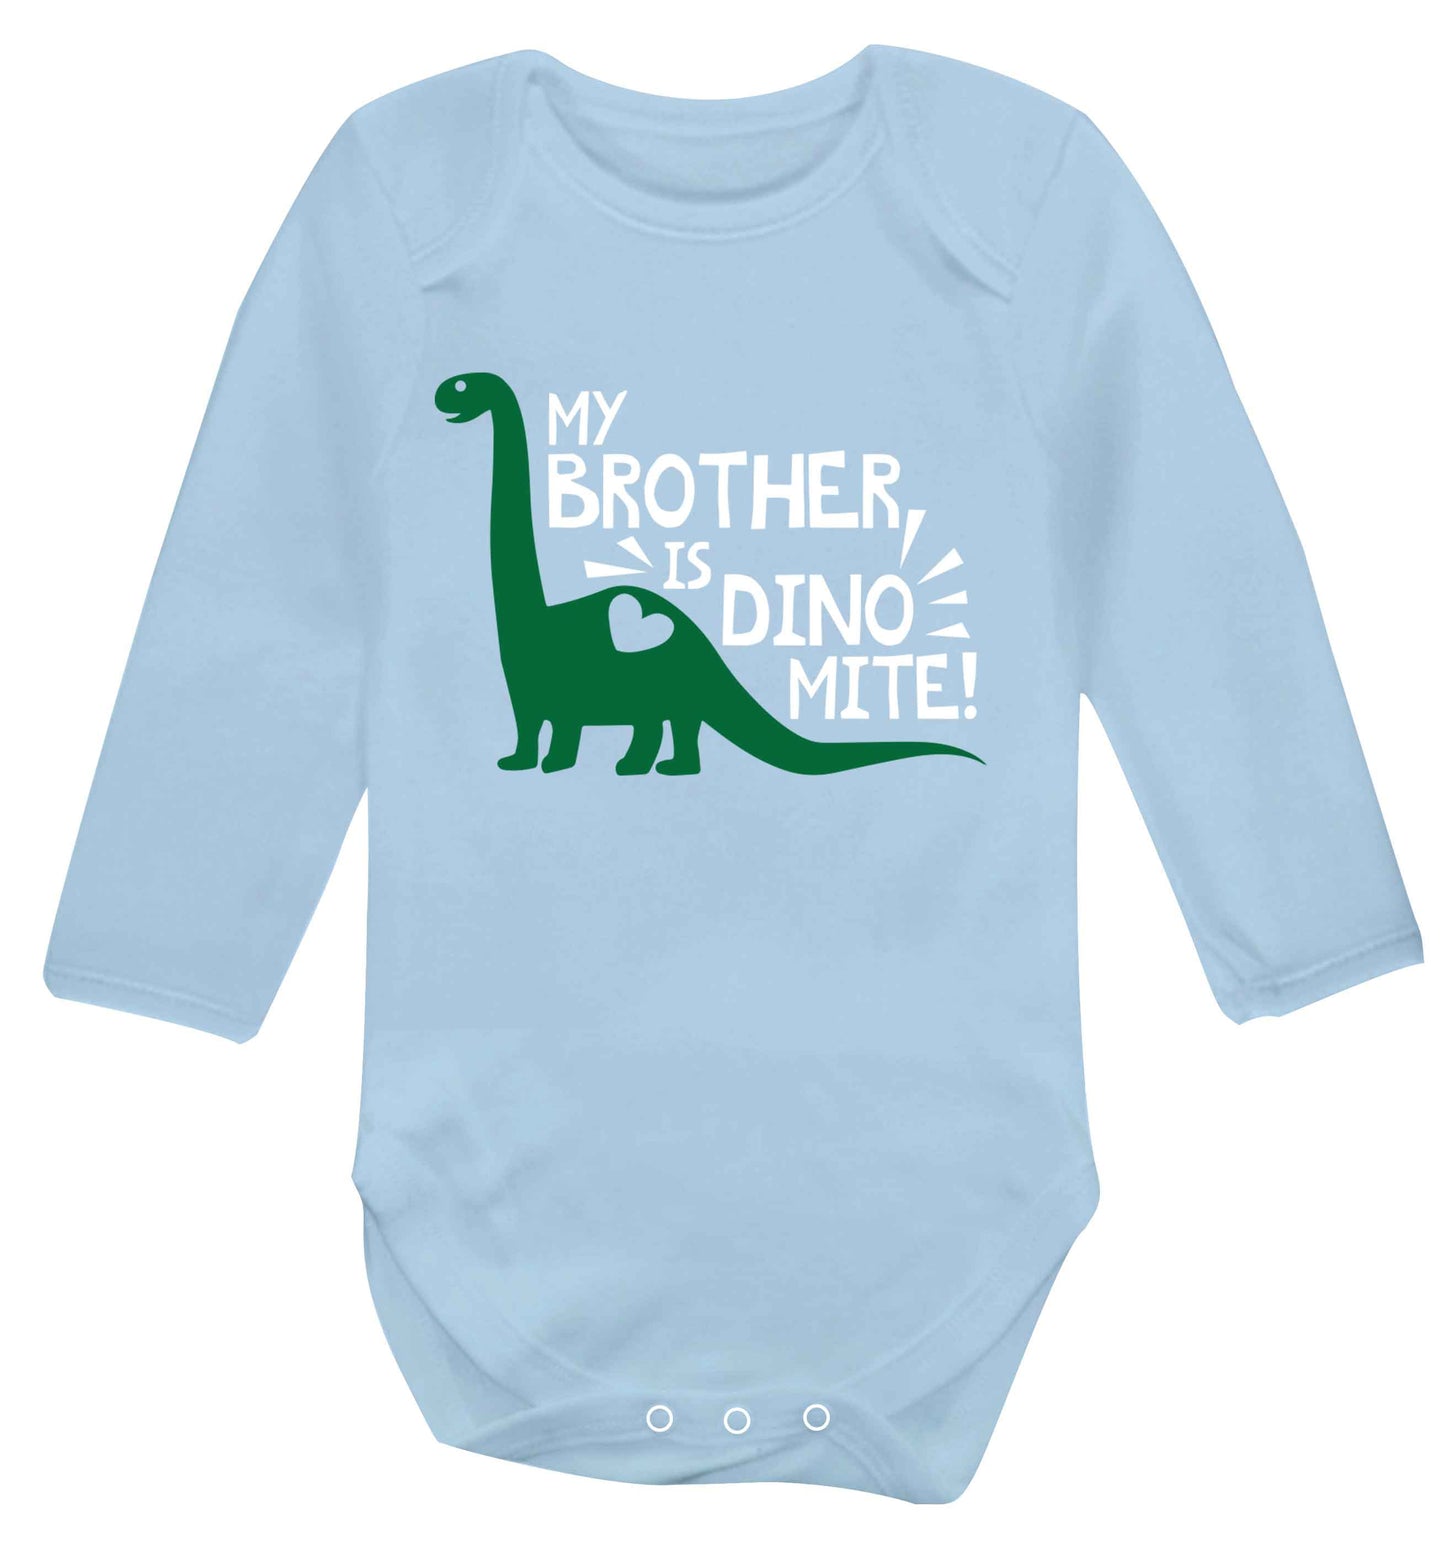 My brother is dinomite! Baby Vest long sleeved pale blue 6-12 months